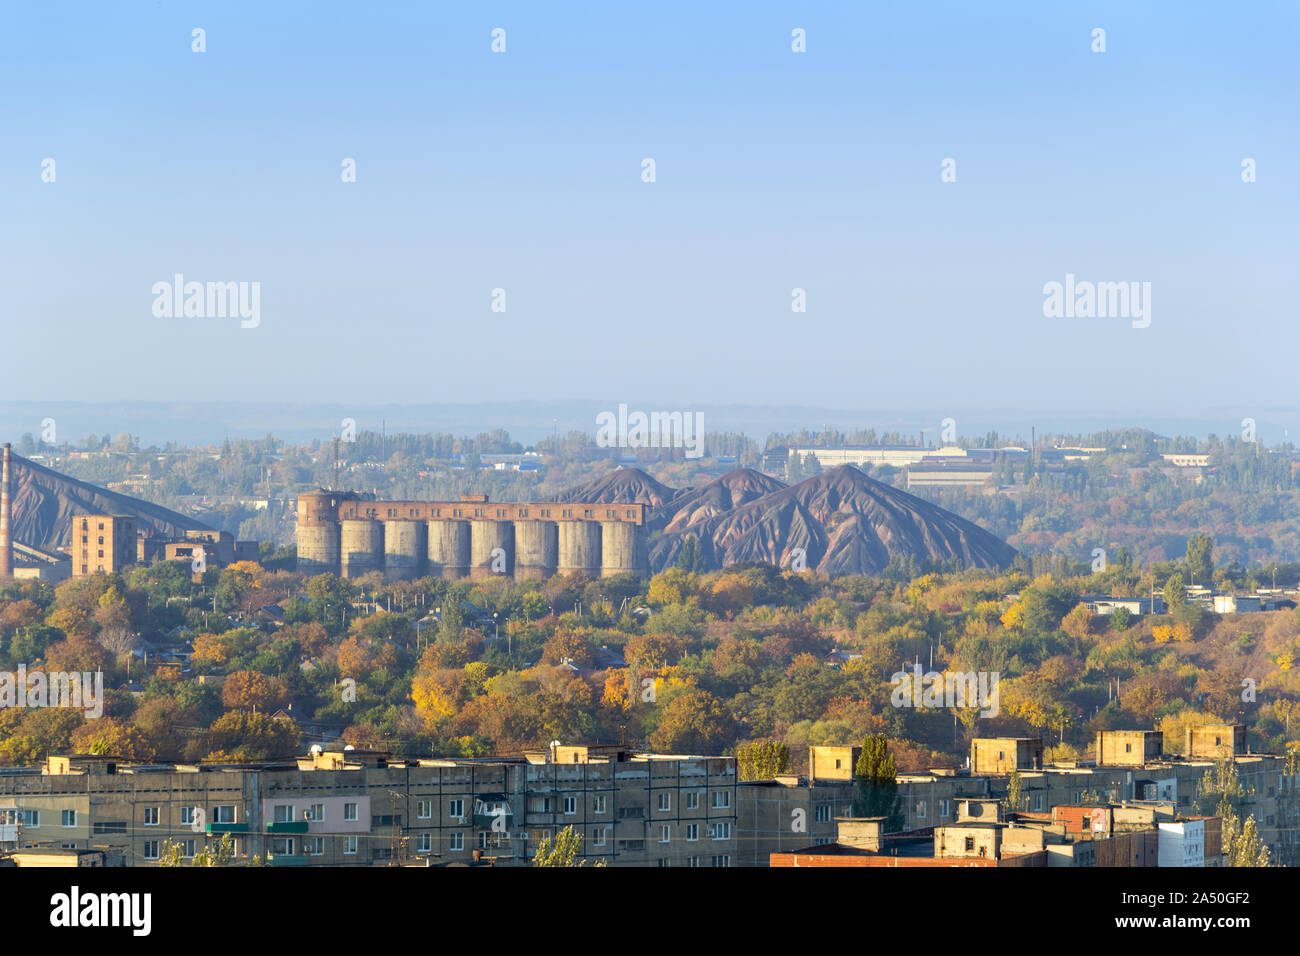 Industrial landscape. Coal processing plant in the Donetsk city. Scenic view of slag heap and constructions of factory over the roofs of residential Stock Photo